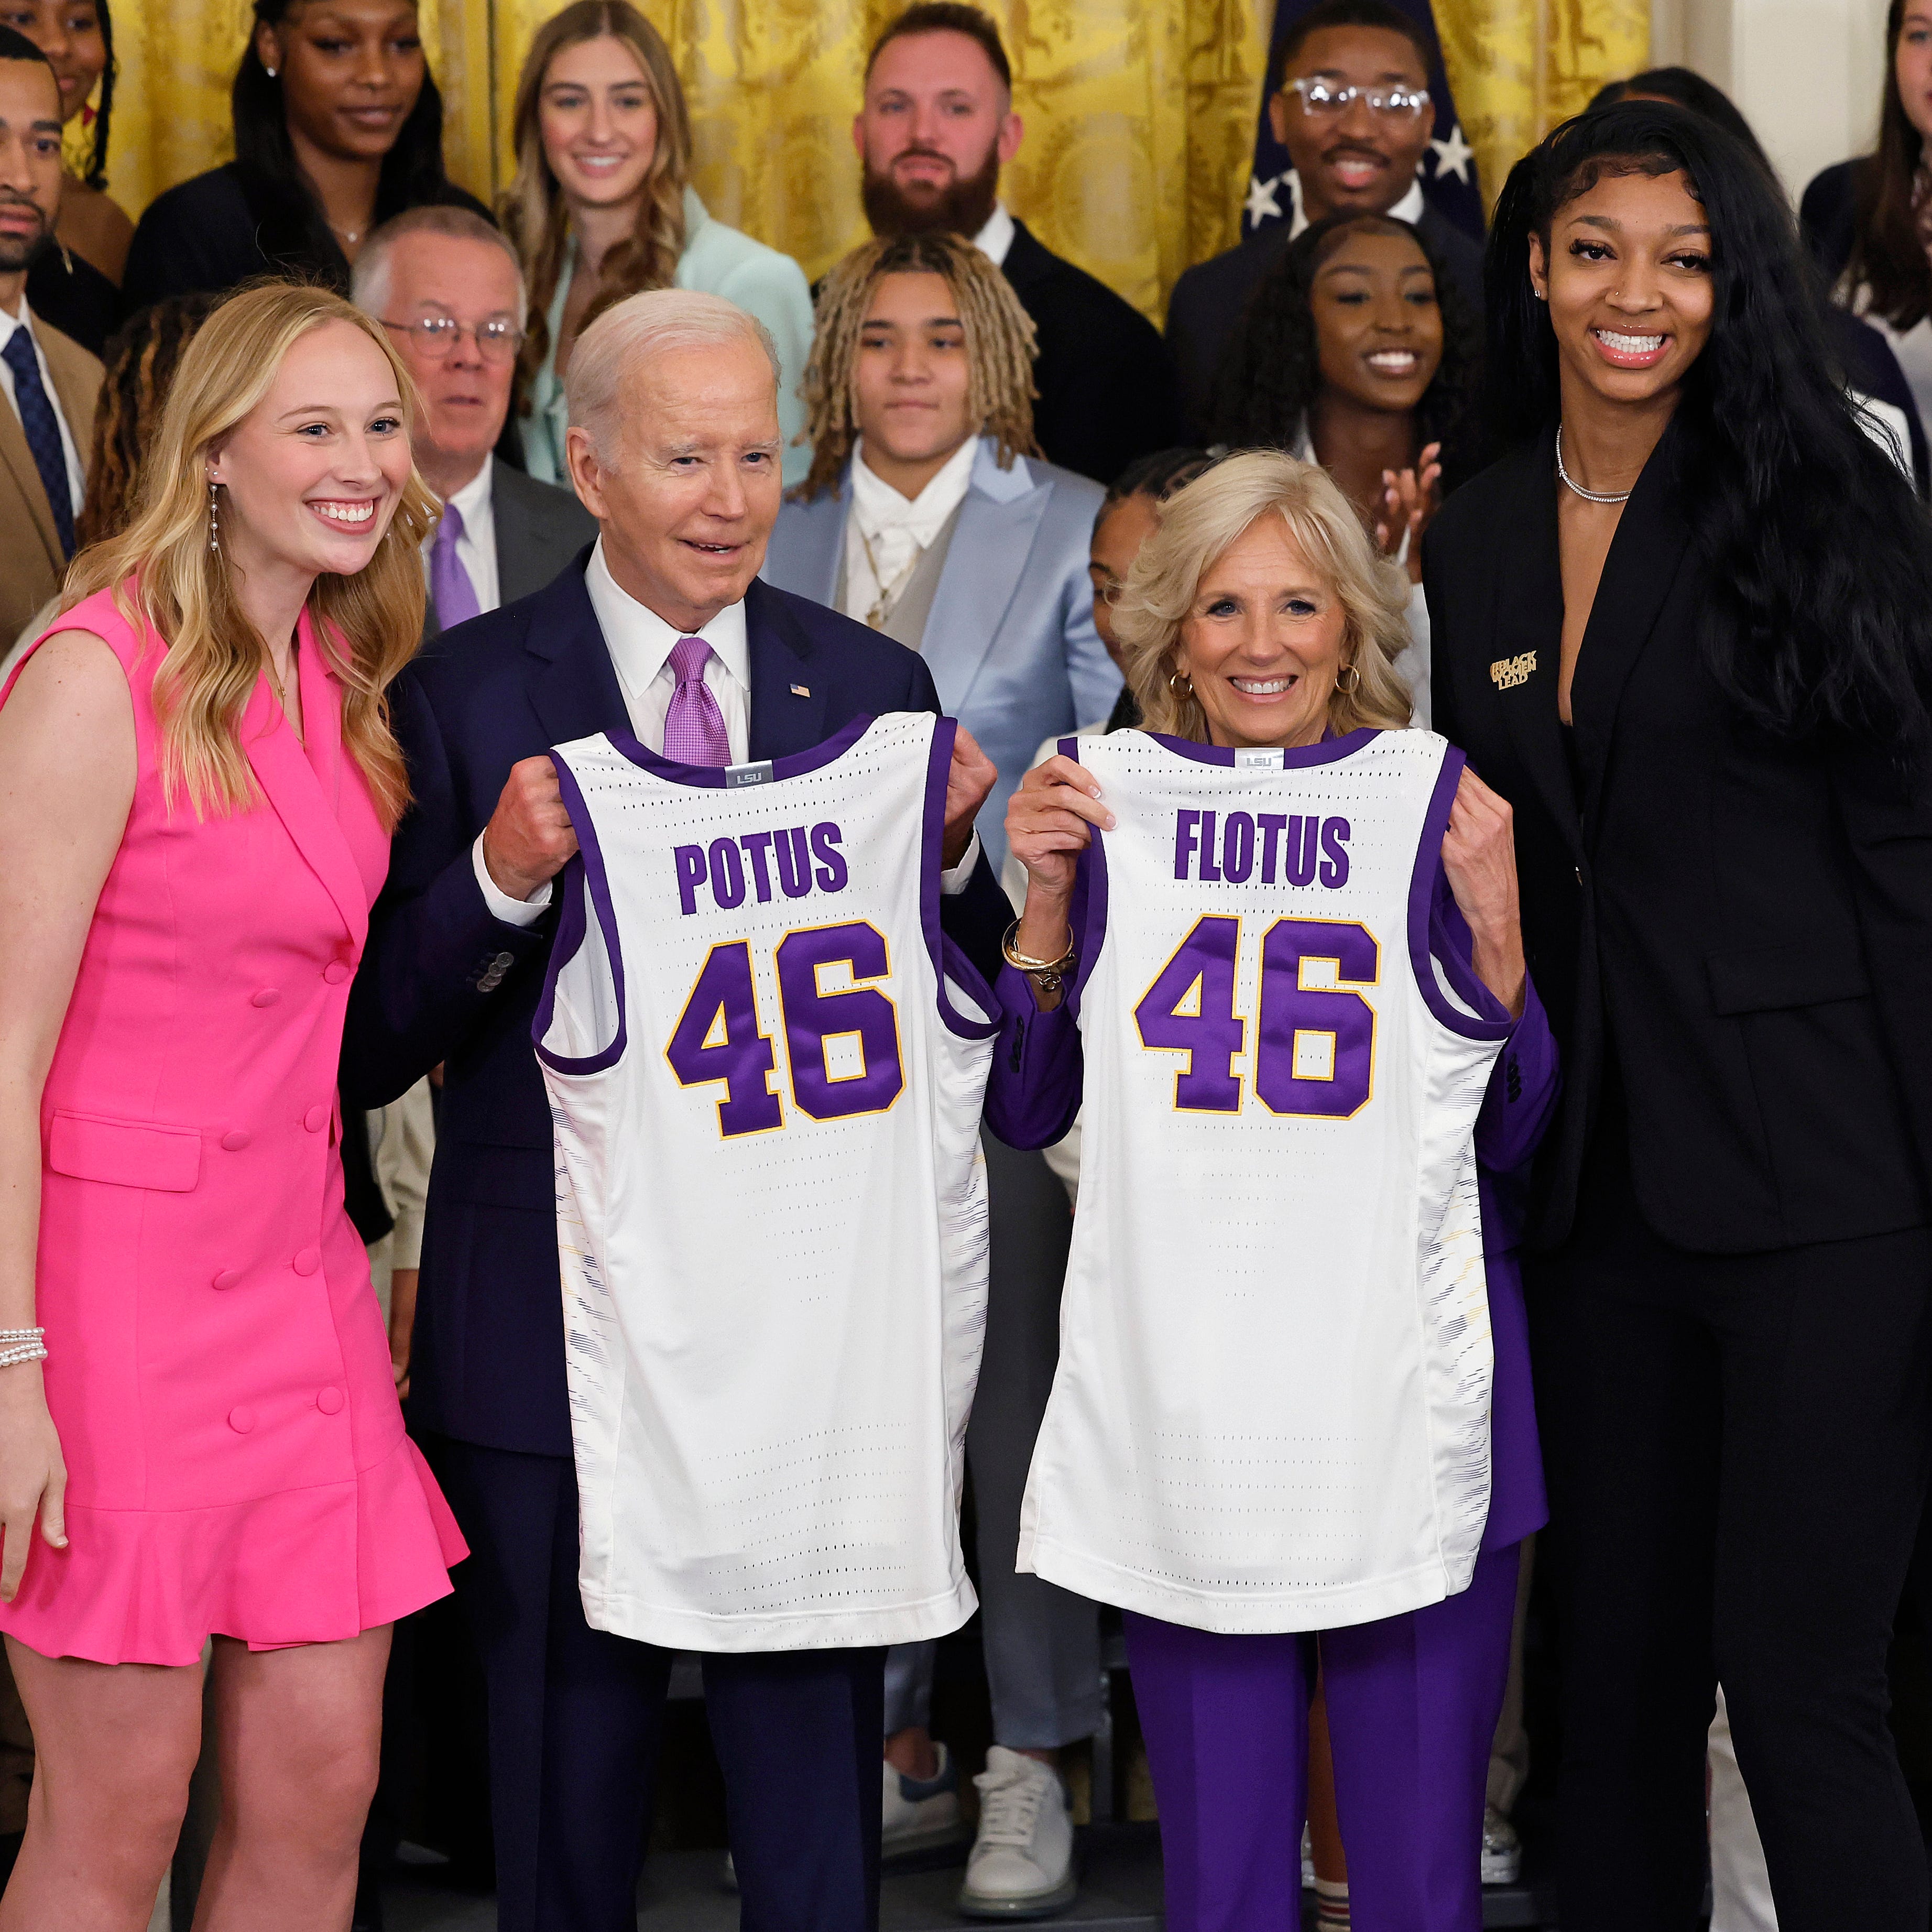 President Joe Biden and first lady Jill Biden pose for photographs with LSU players Emily Ward, left, and Angel Reese, right, during a White House ceremony honoring the Tigers winning the NCAA women's basketball tournament.